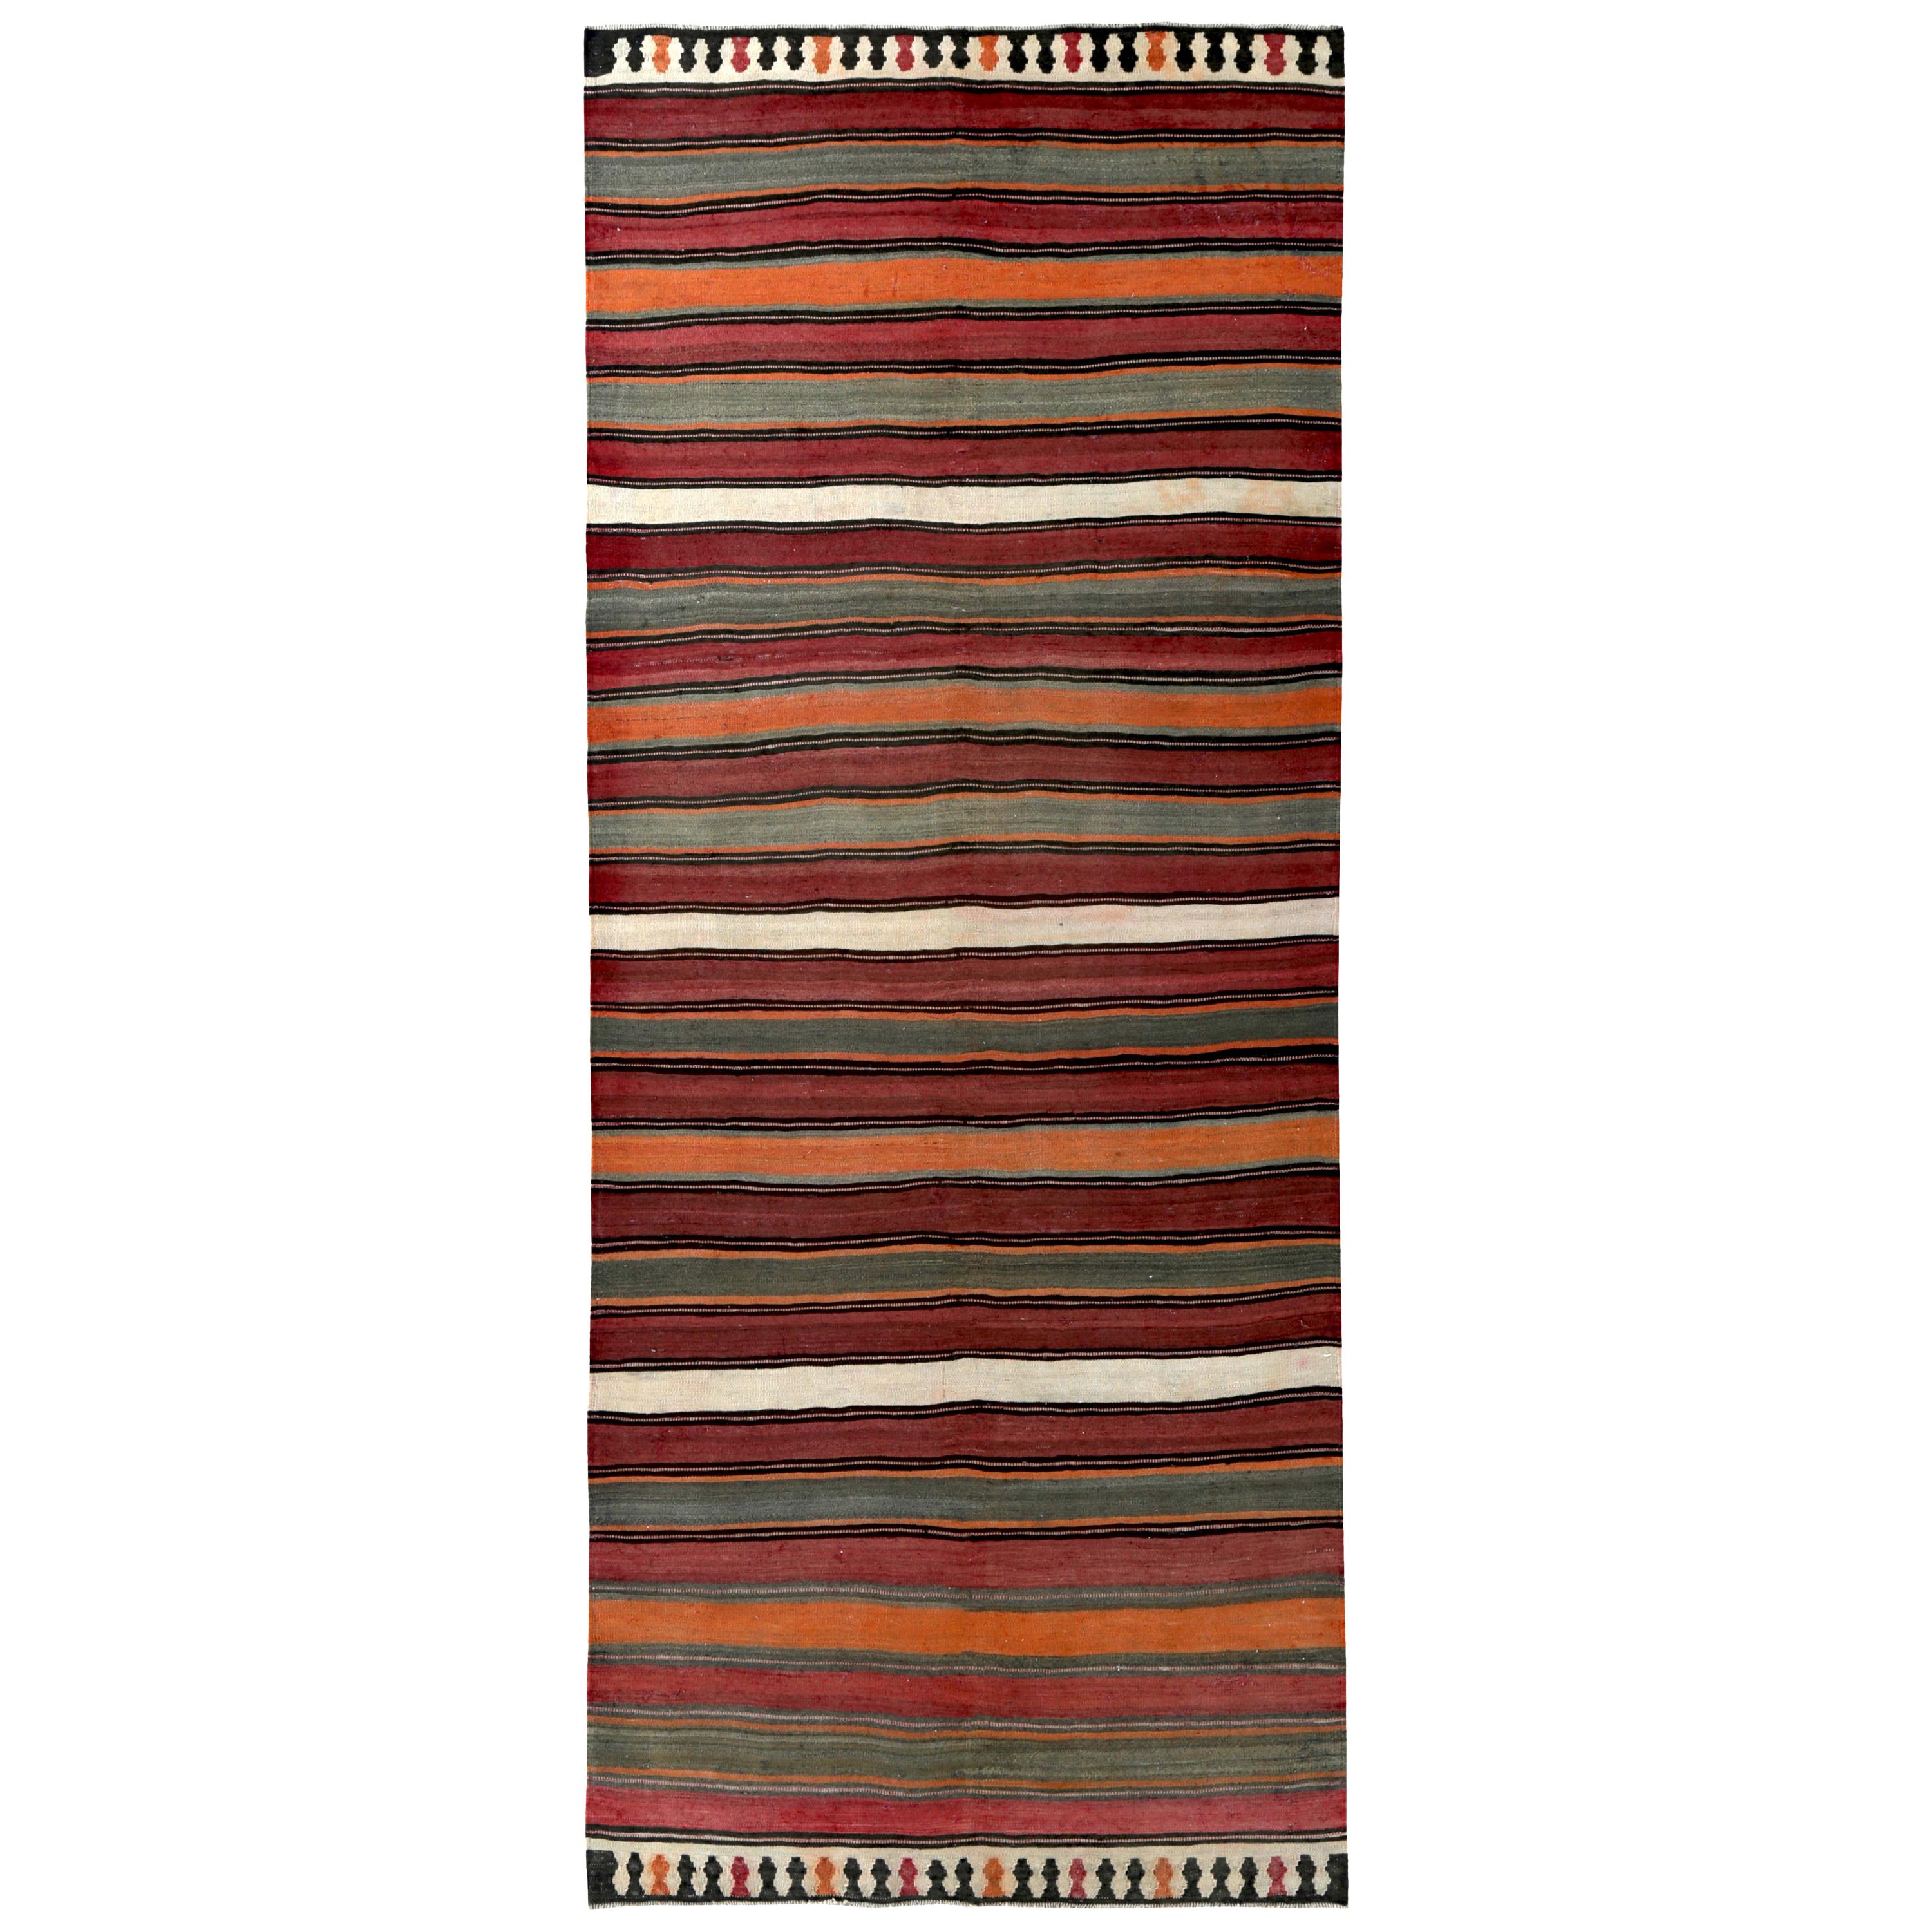 Modern Turkish Kilim Runner Rug with Red, Orange and Ivory Stripes Pattern For Sale